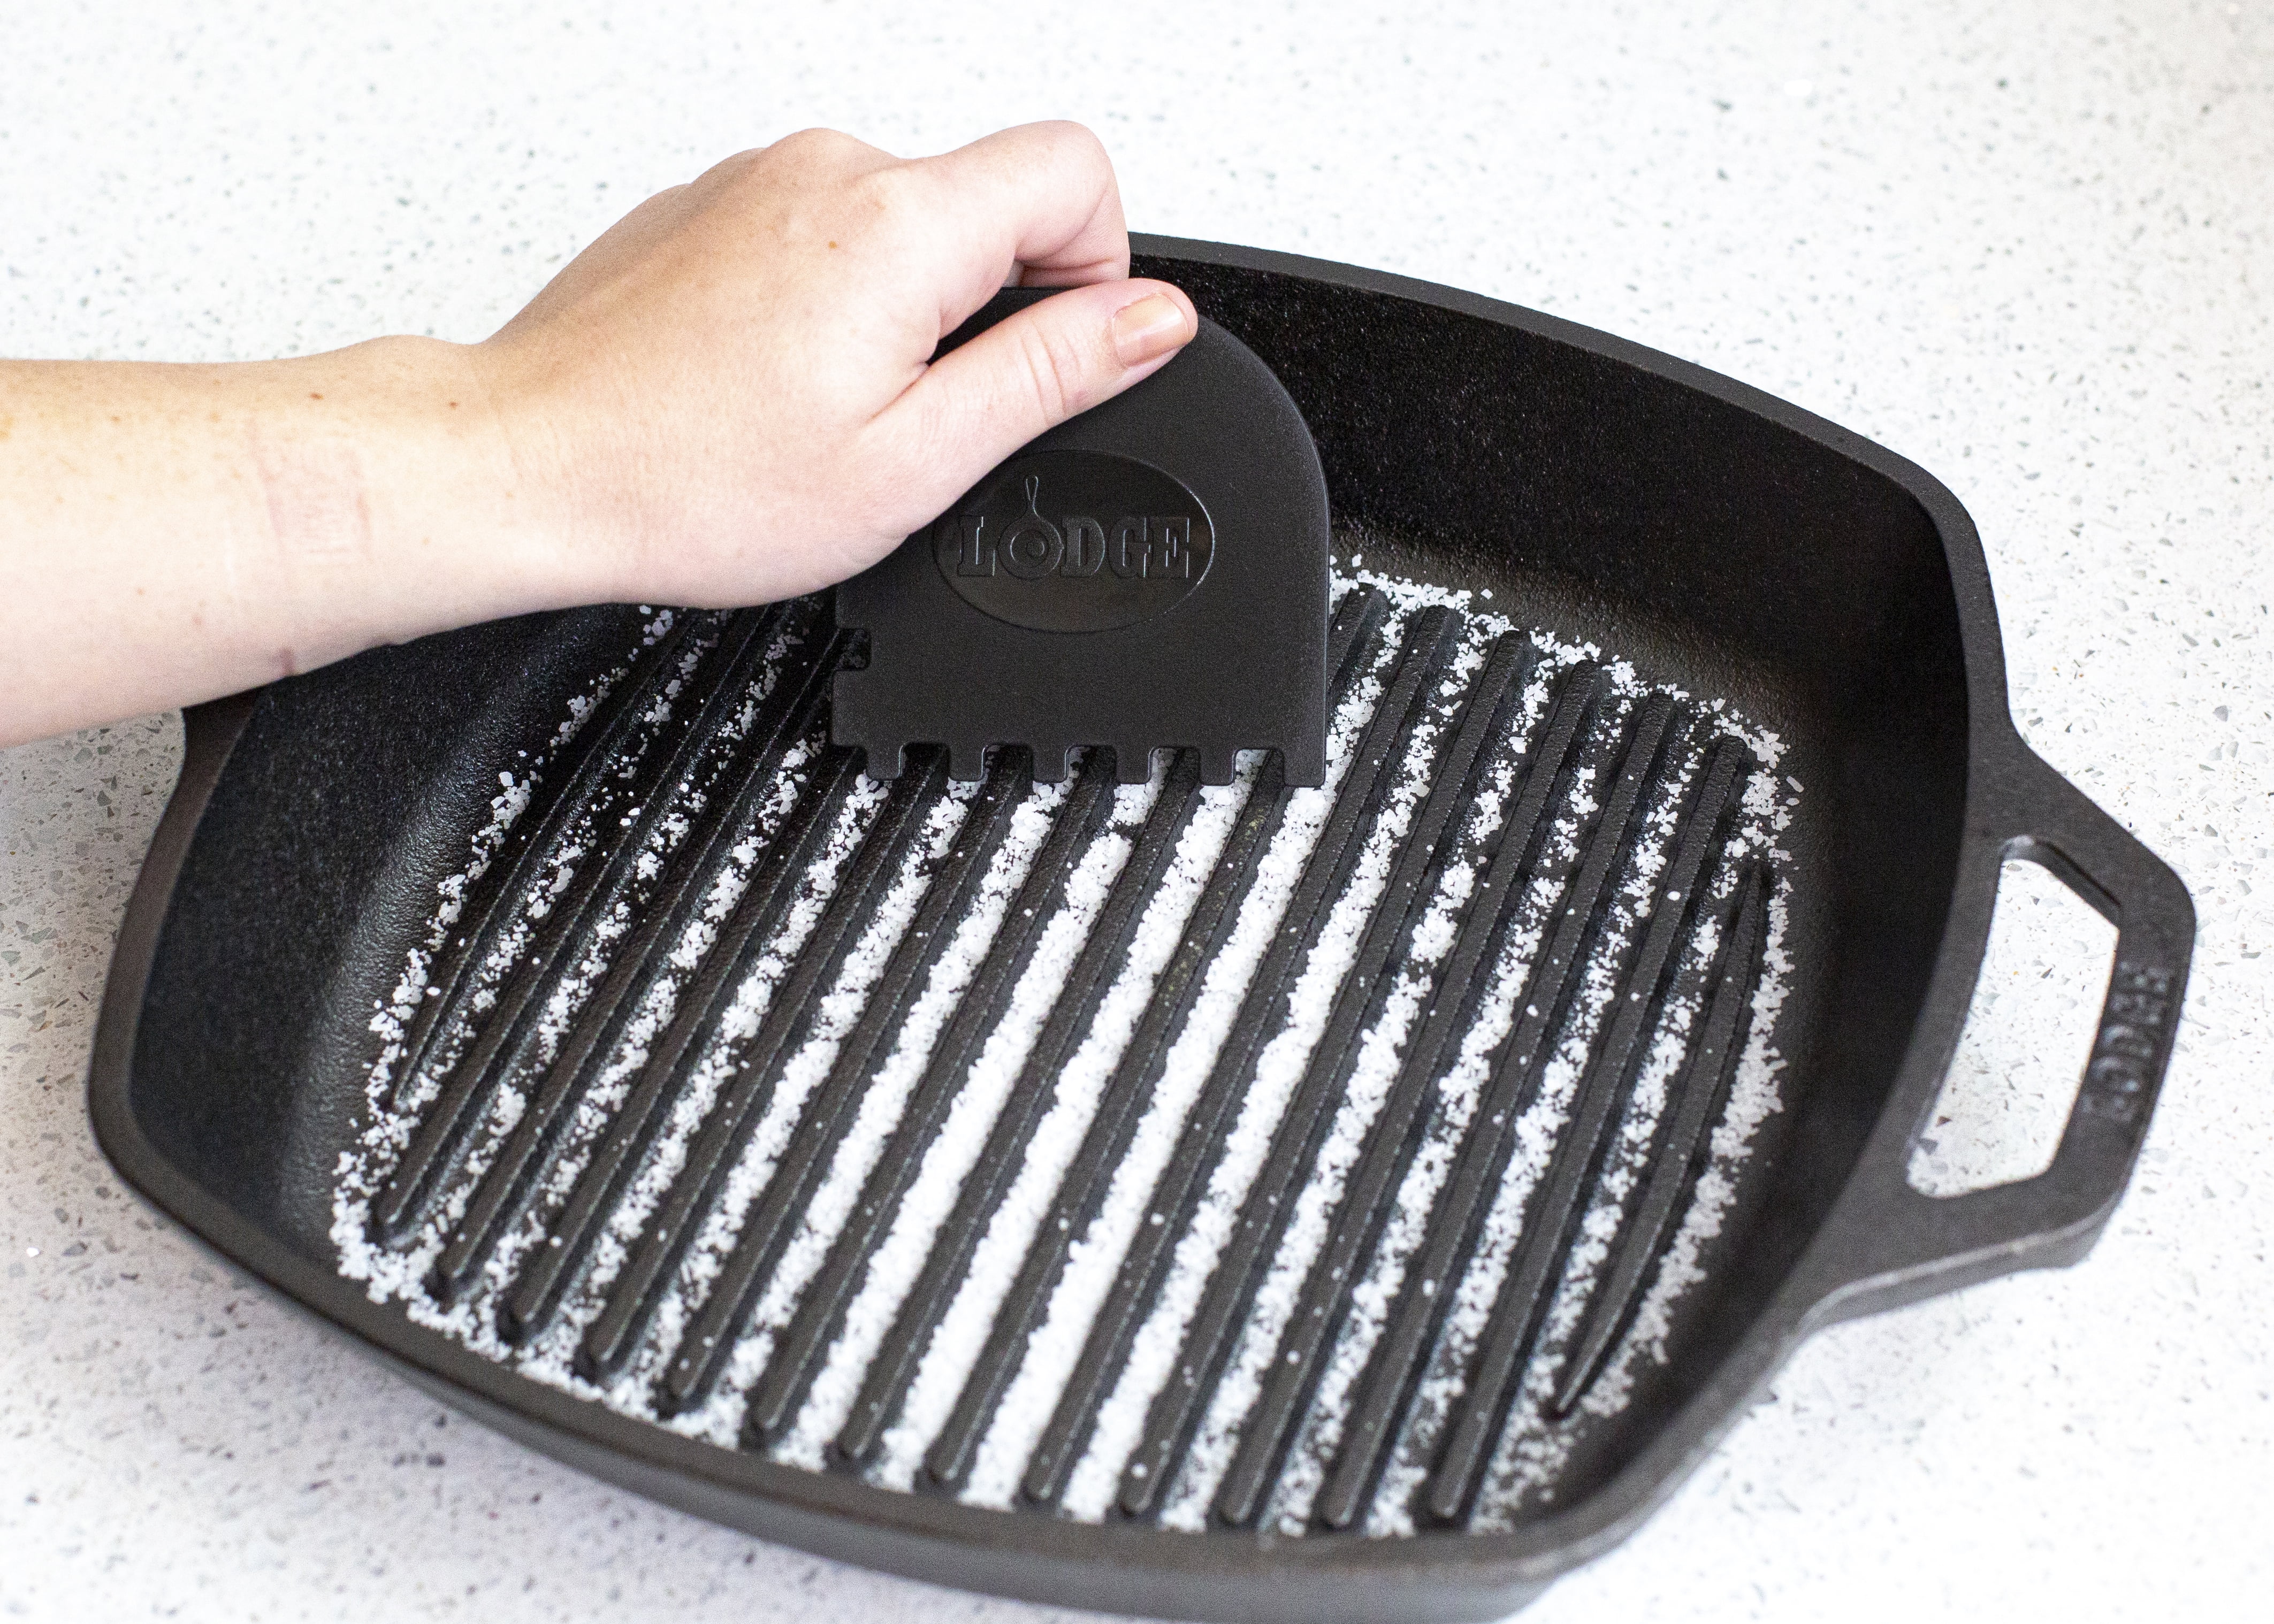 Lodge Logic 10.25-inch Grill Pan with Grill Press - Bed Bath